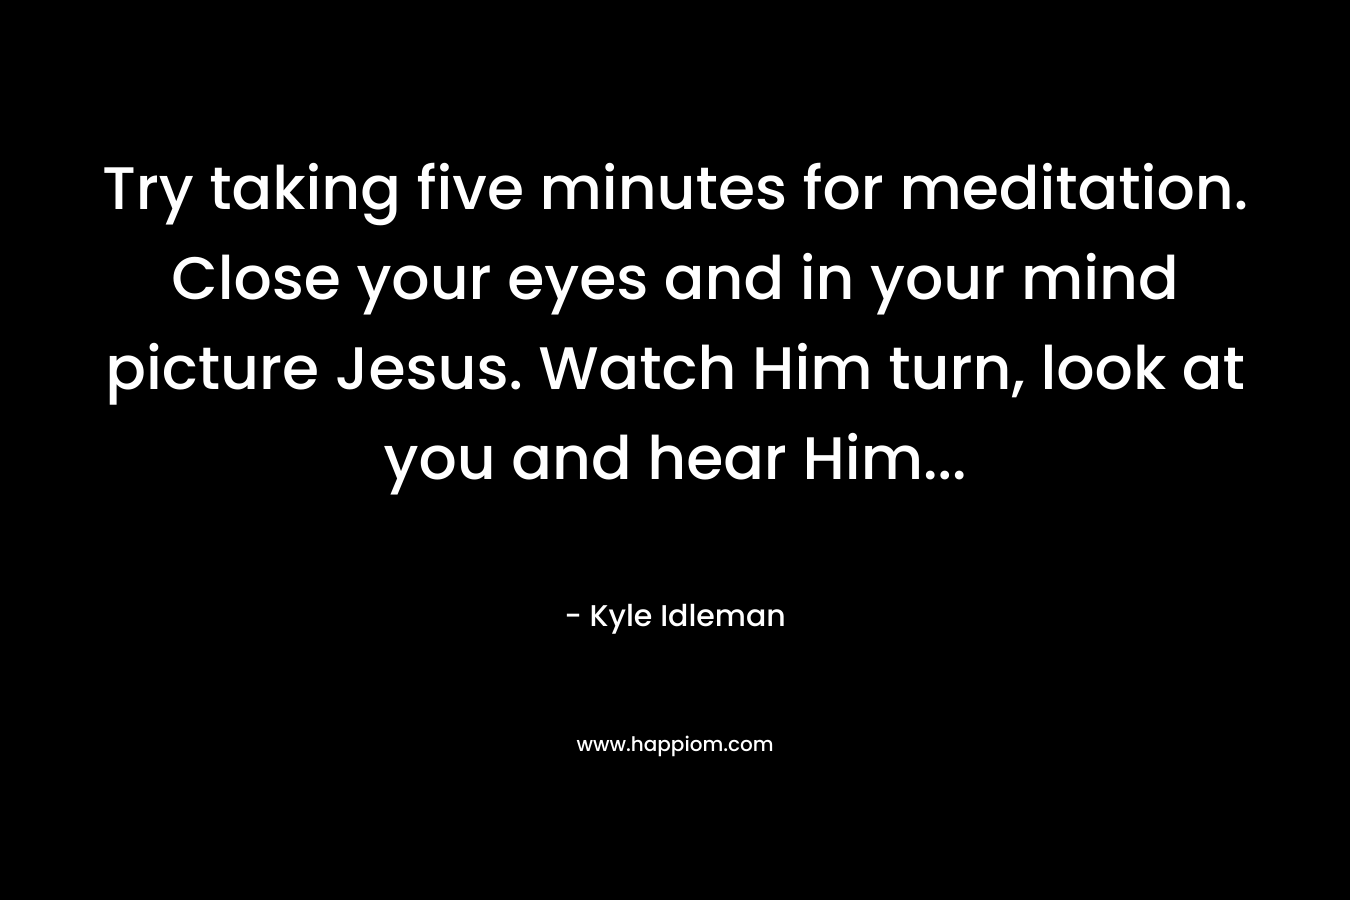 Try taking five minutes for meditation. Close your eyes and in your mind picture Jesus. Watch Him turn, look at you and hear Him...